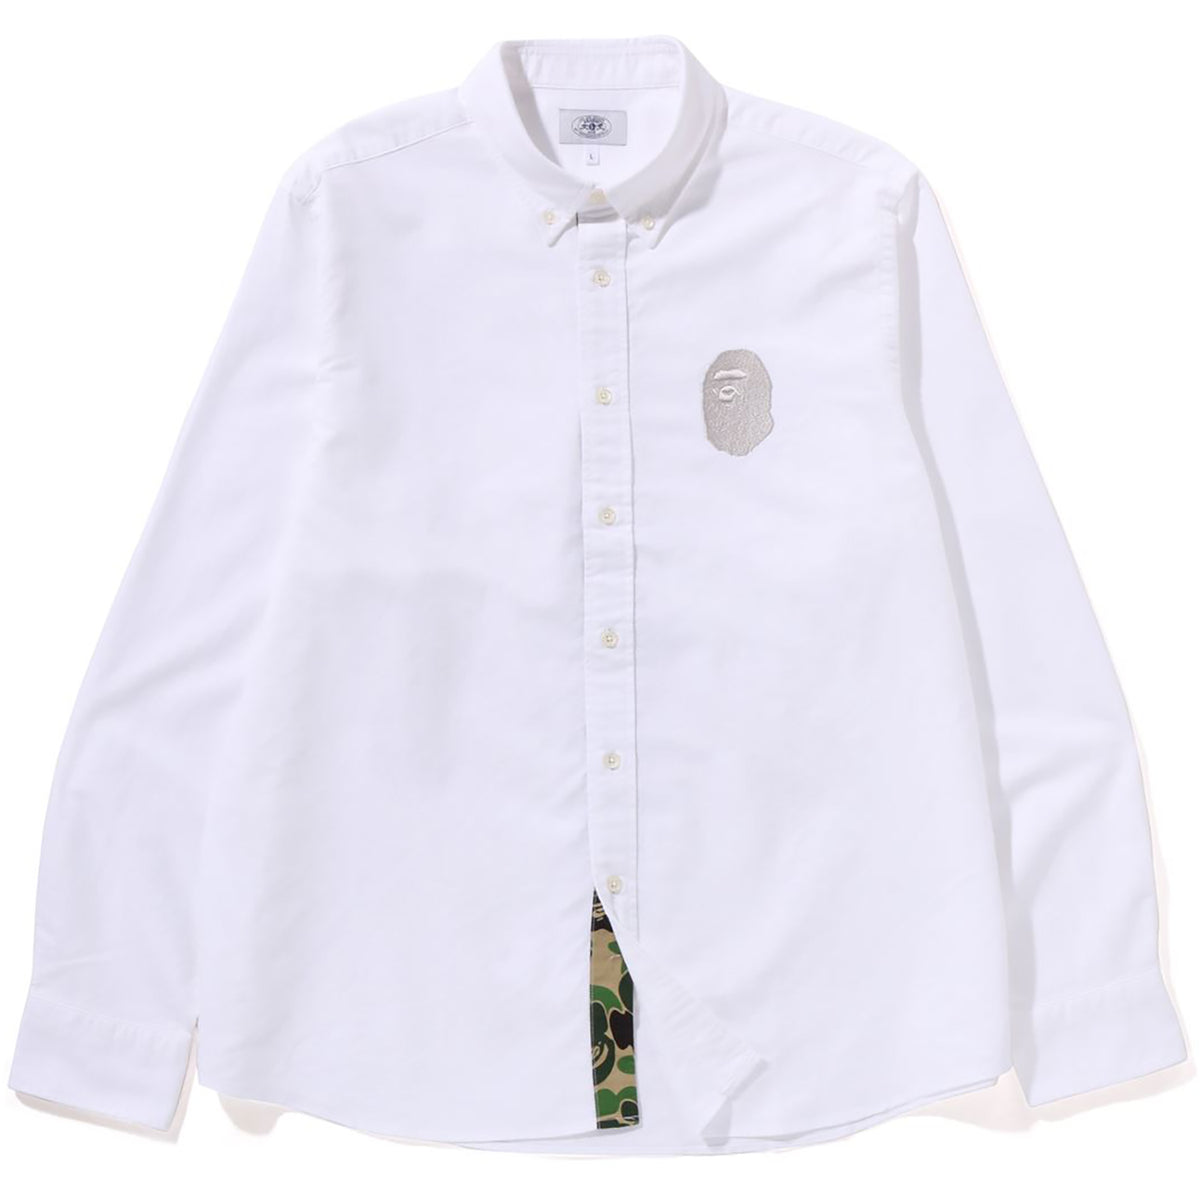 APE HEAD EMBROIDERY OXFORD SHIRT RELAXED FIT MENS